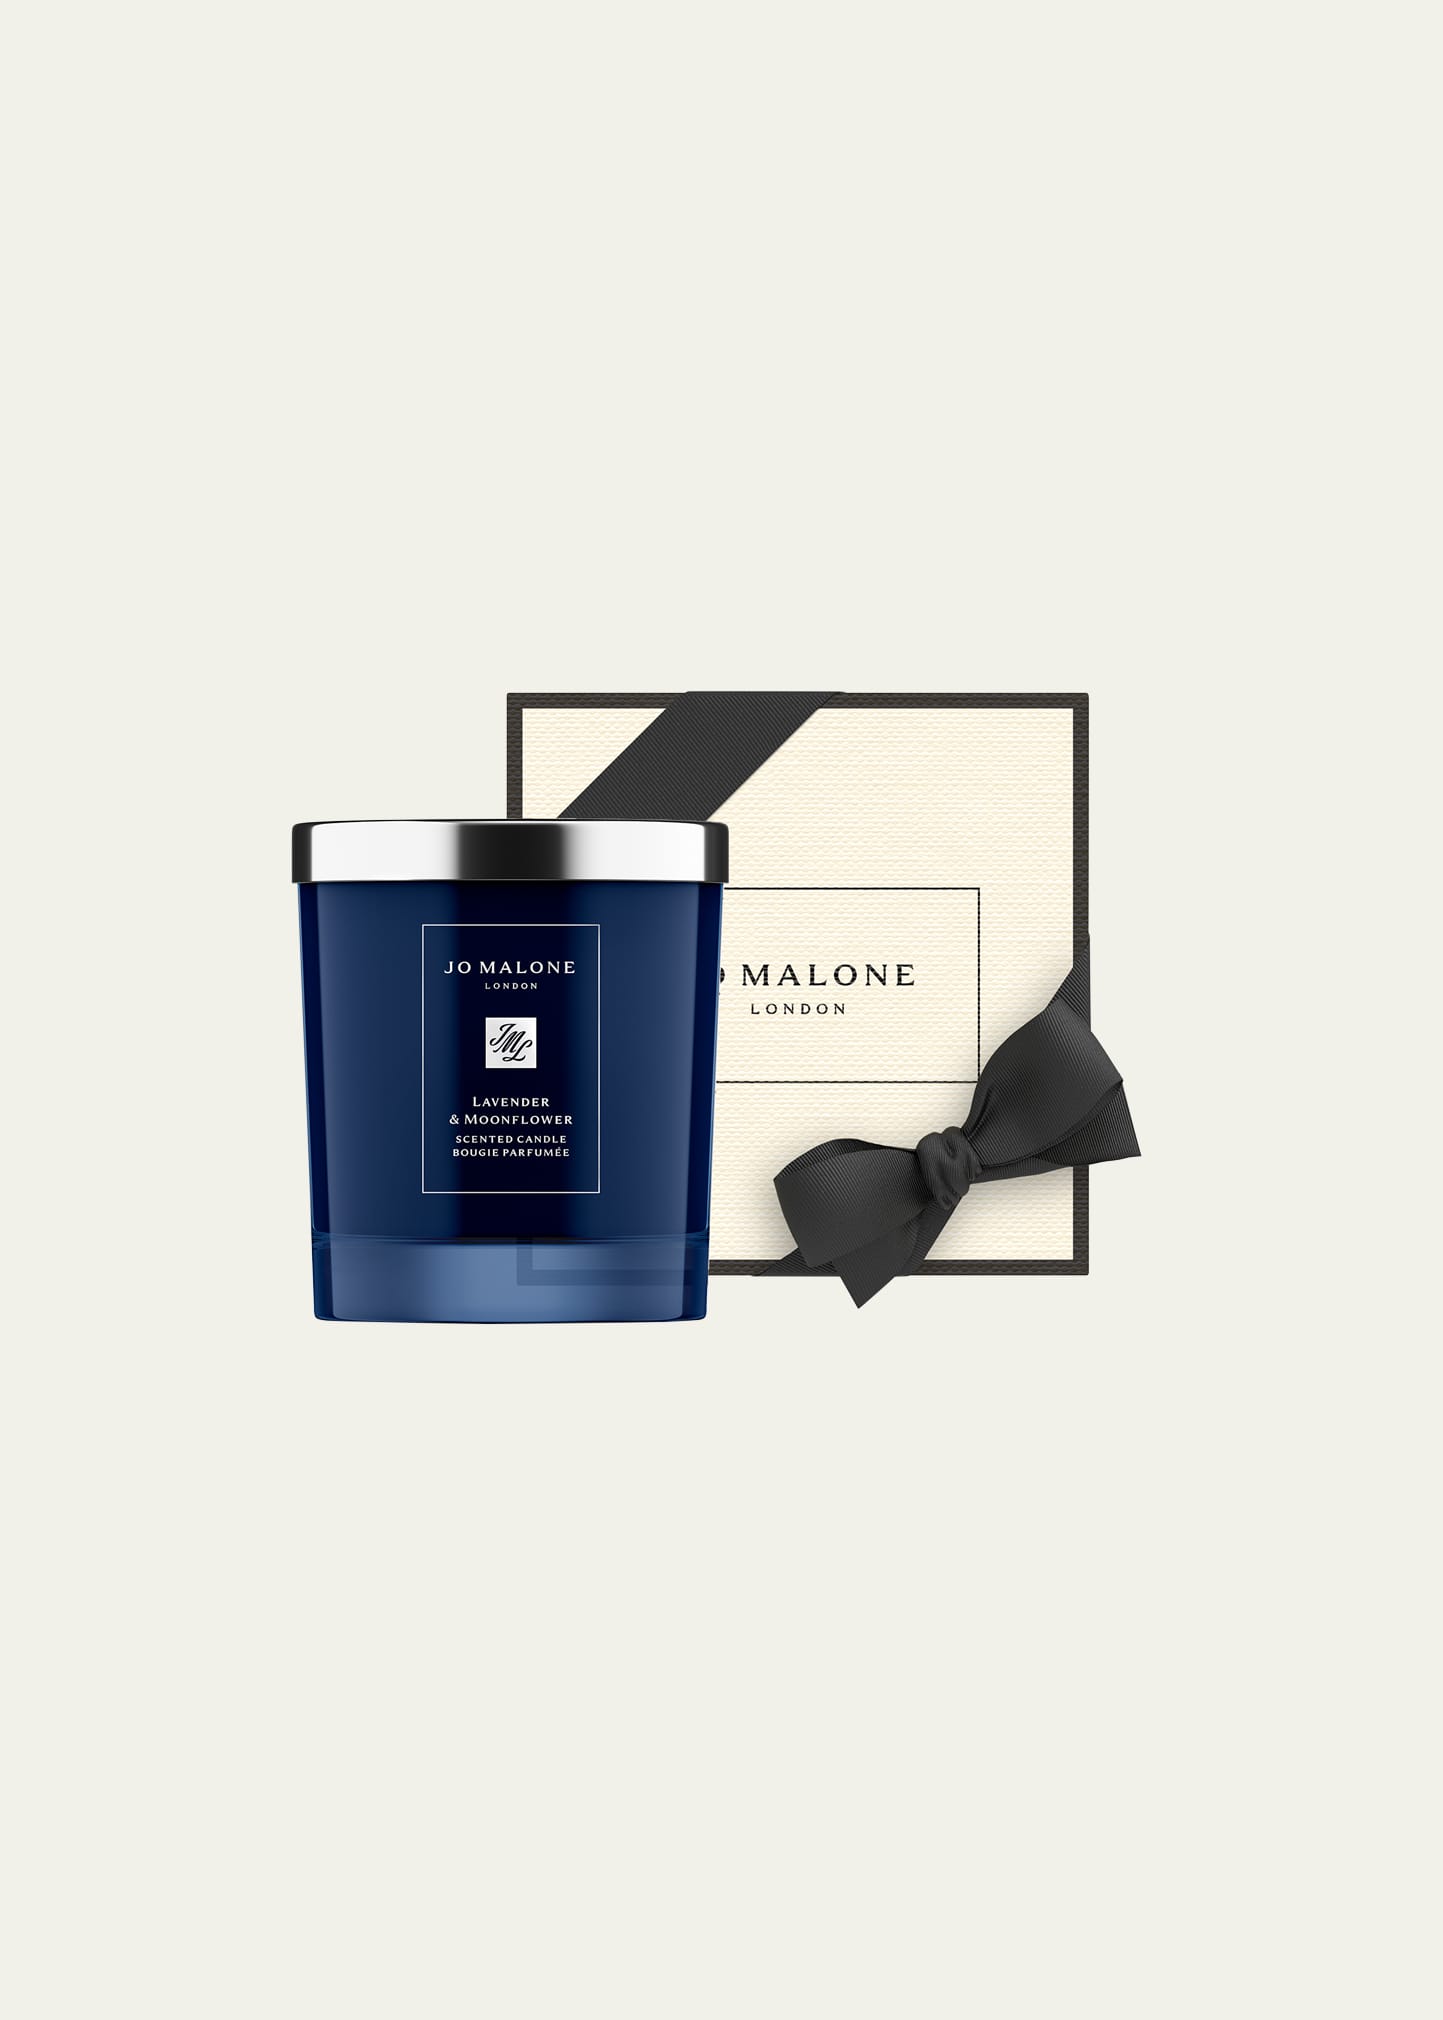 Jo Malone London 7 Oz. Lavender & Moonflower Home Candle